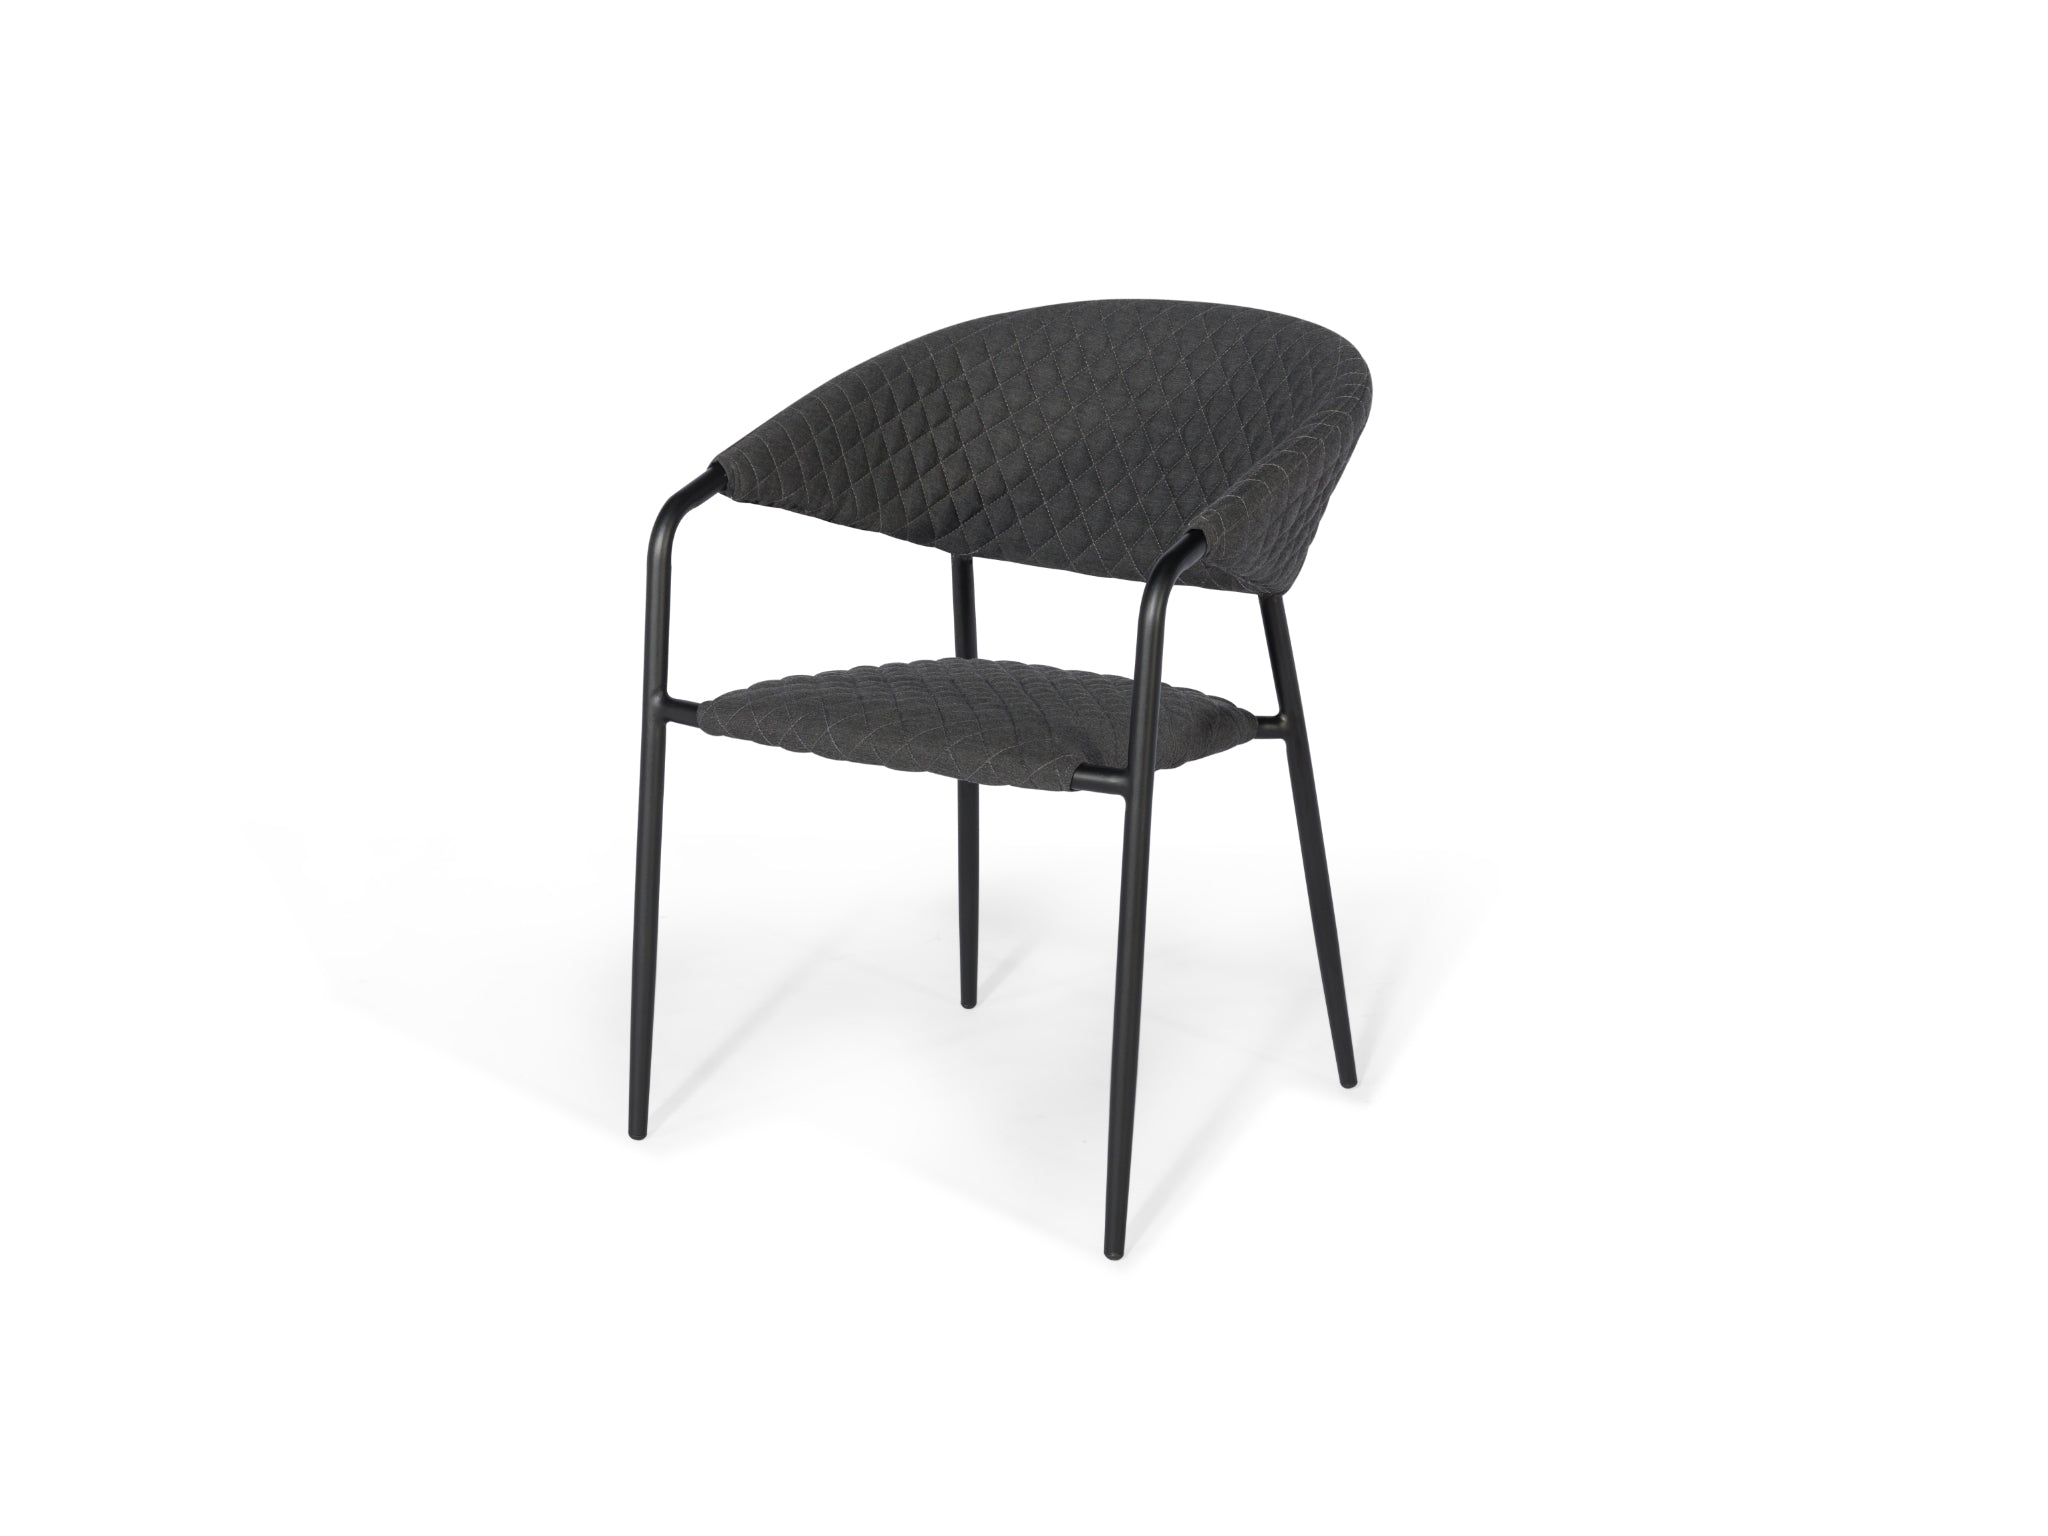 SIMPO by Sunlongarden Pebble Dining Chair